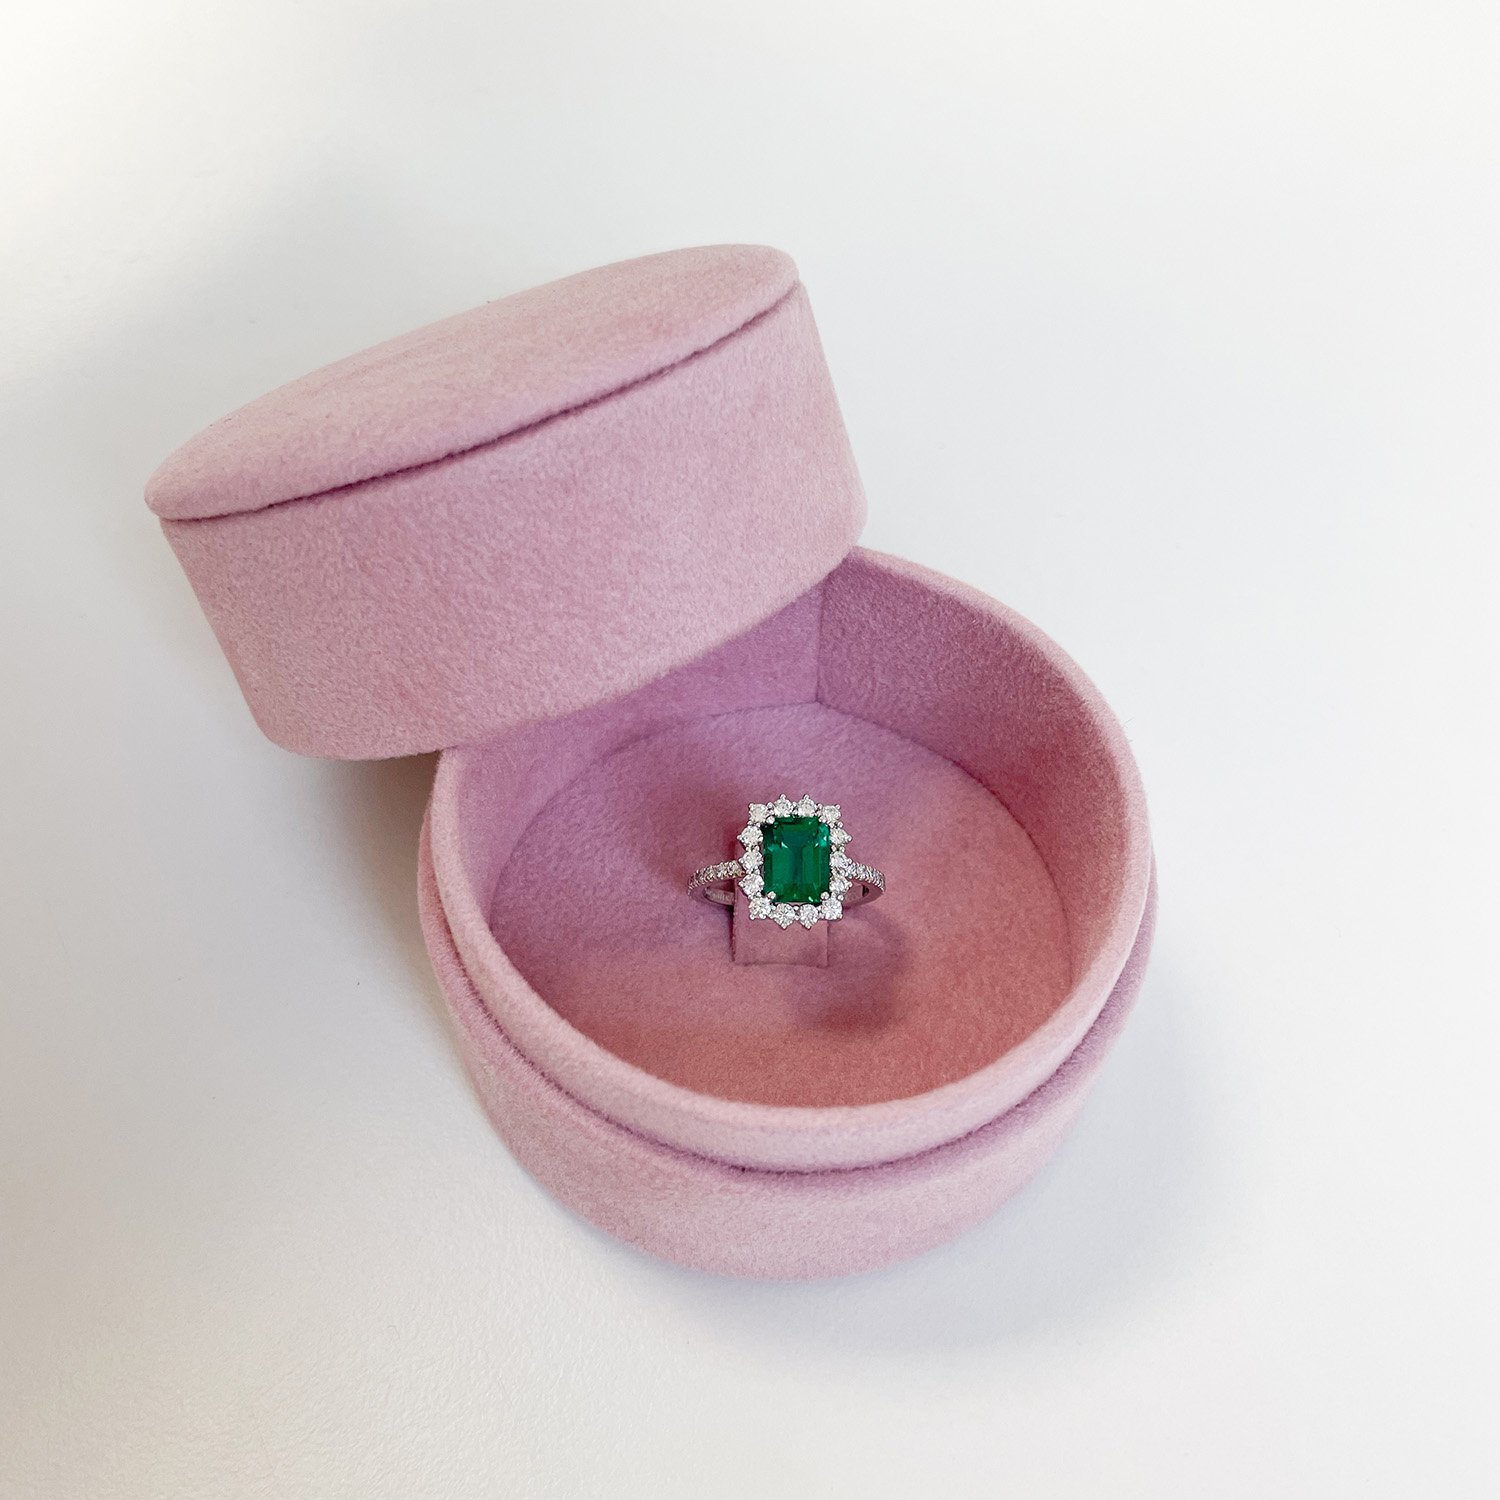 Tailor-made diamond and emerald ring in 18 K white gold